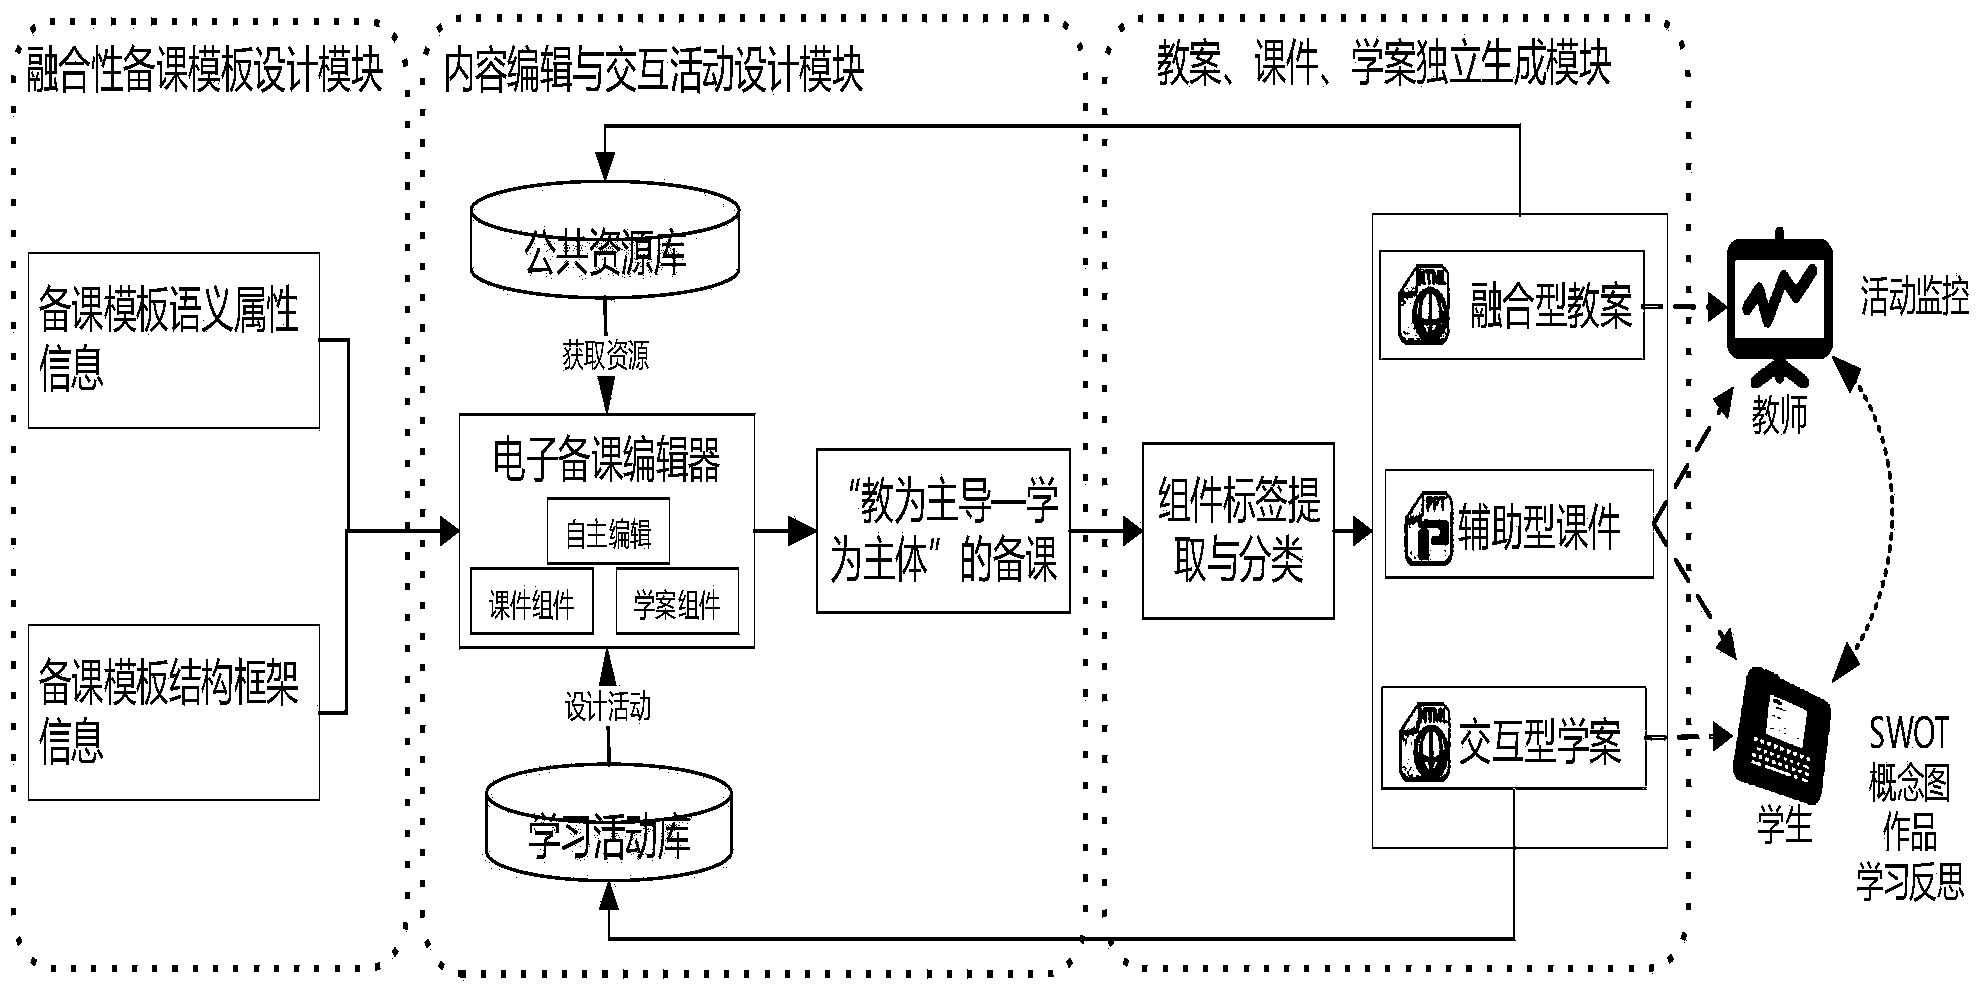 Integration electronic lesson preparation system and method